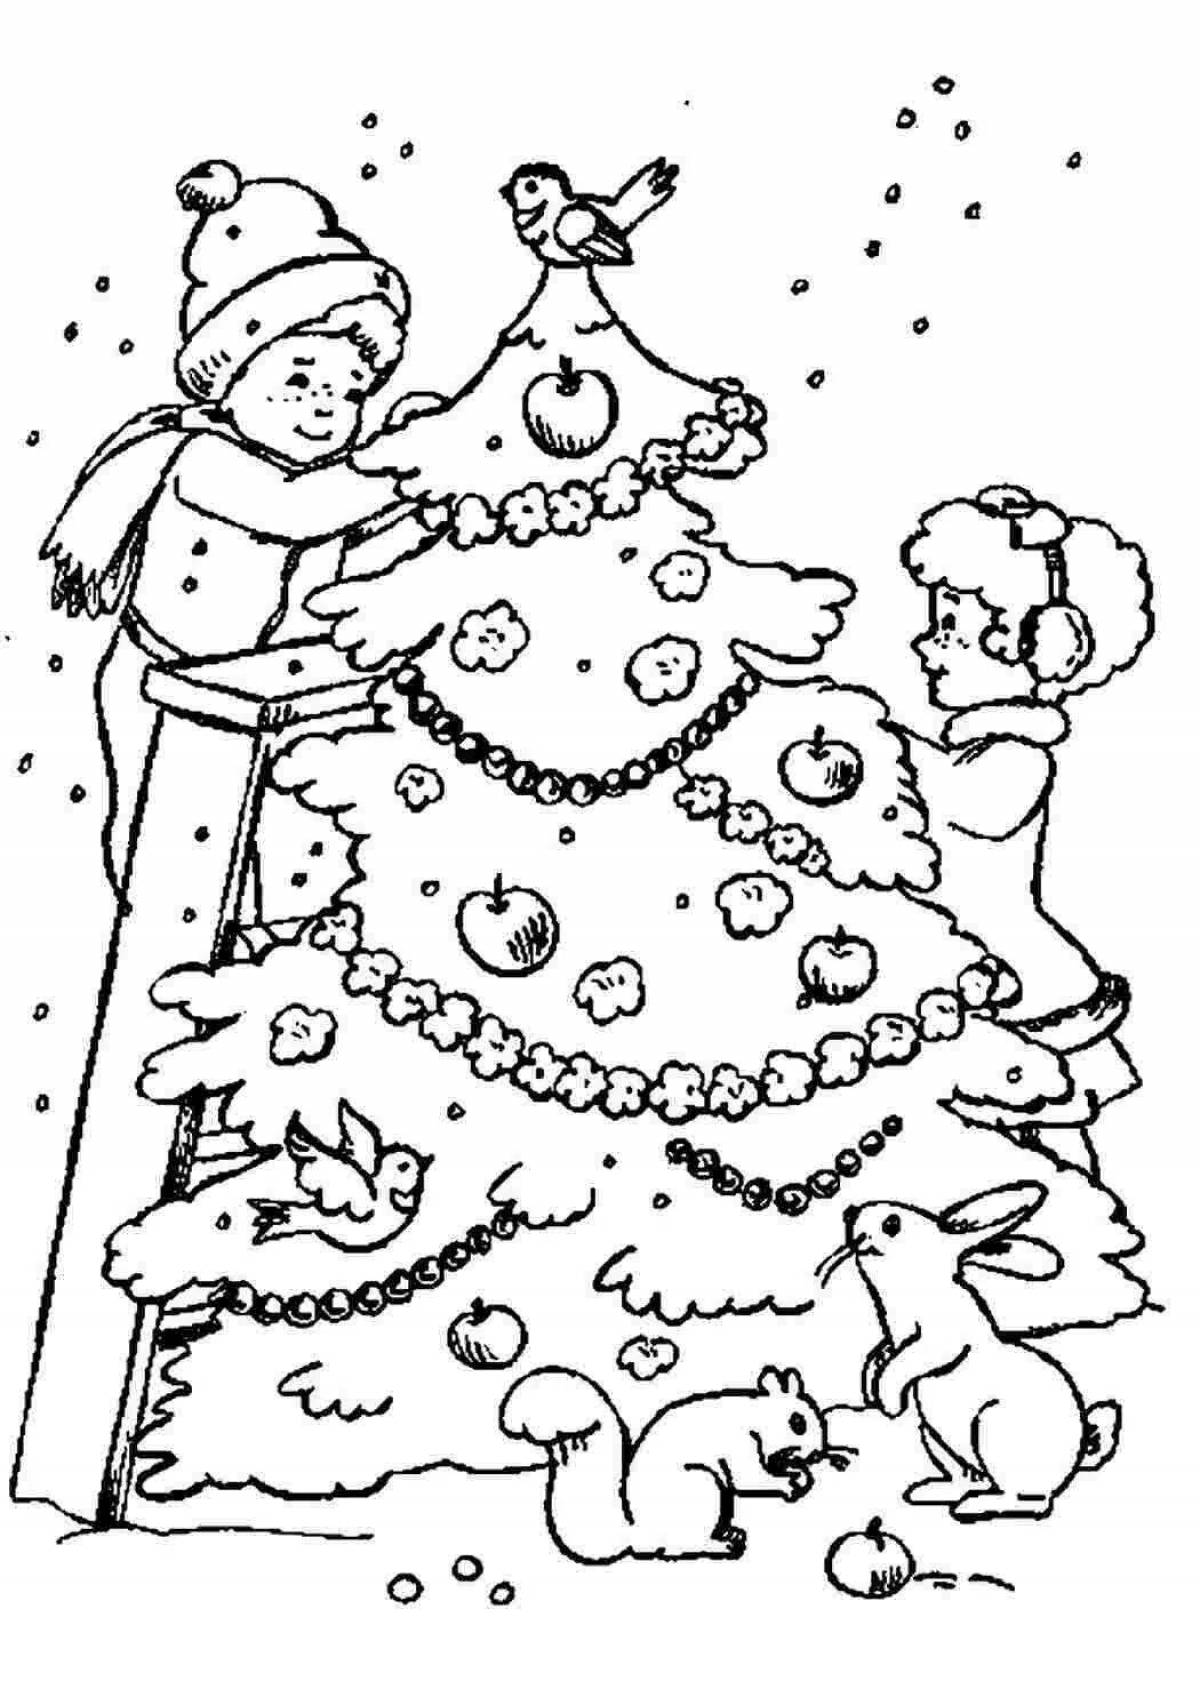 Radiant forest grew a Christmas tree coloring book